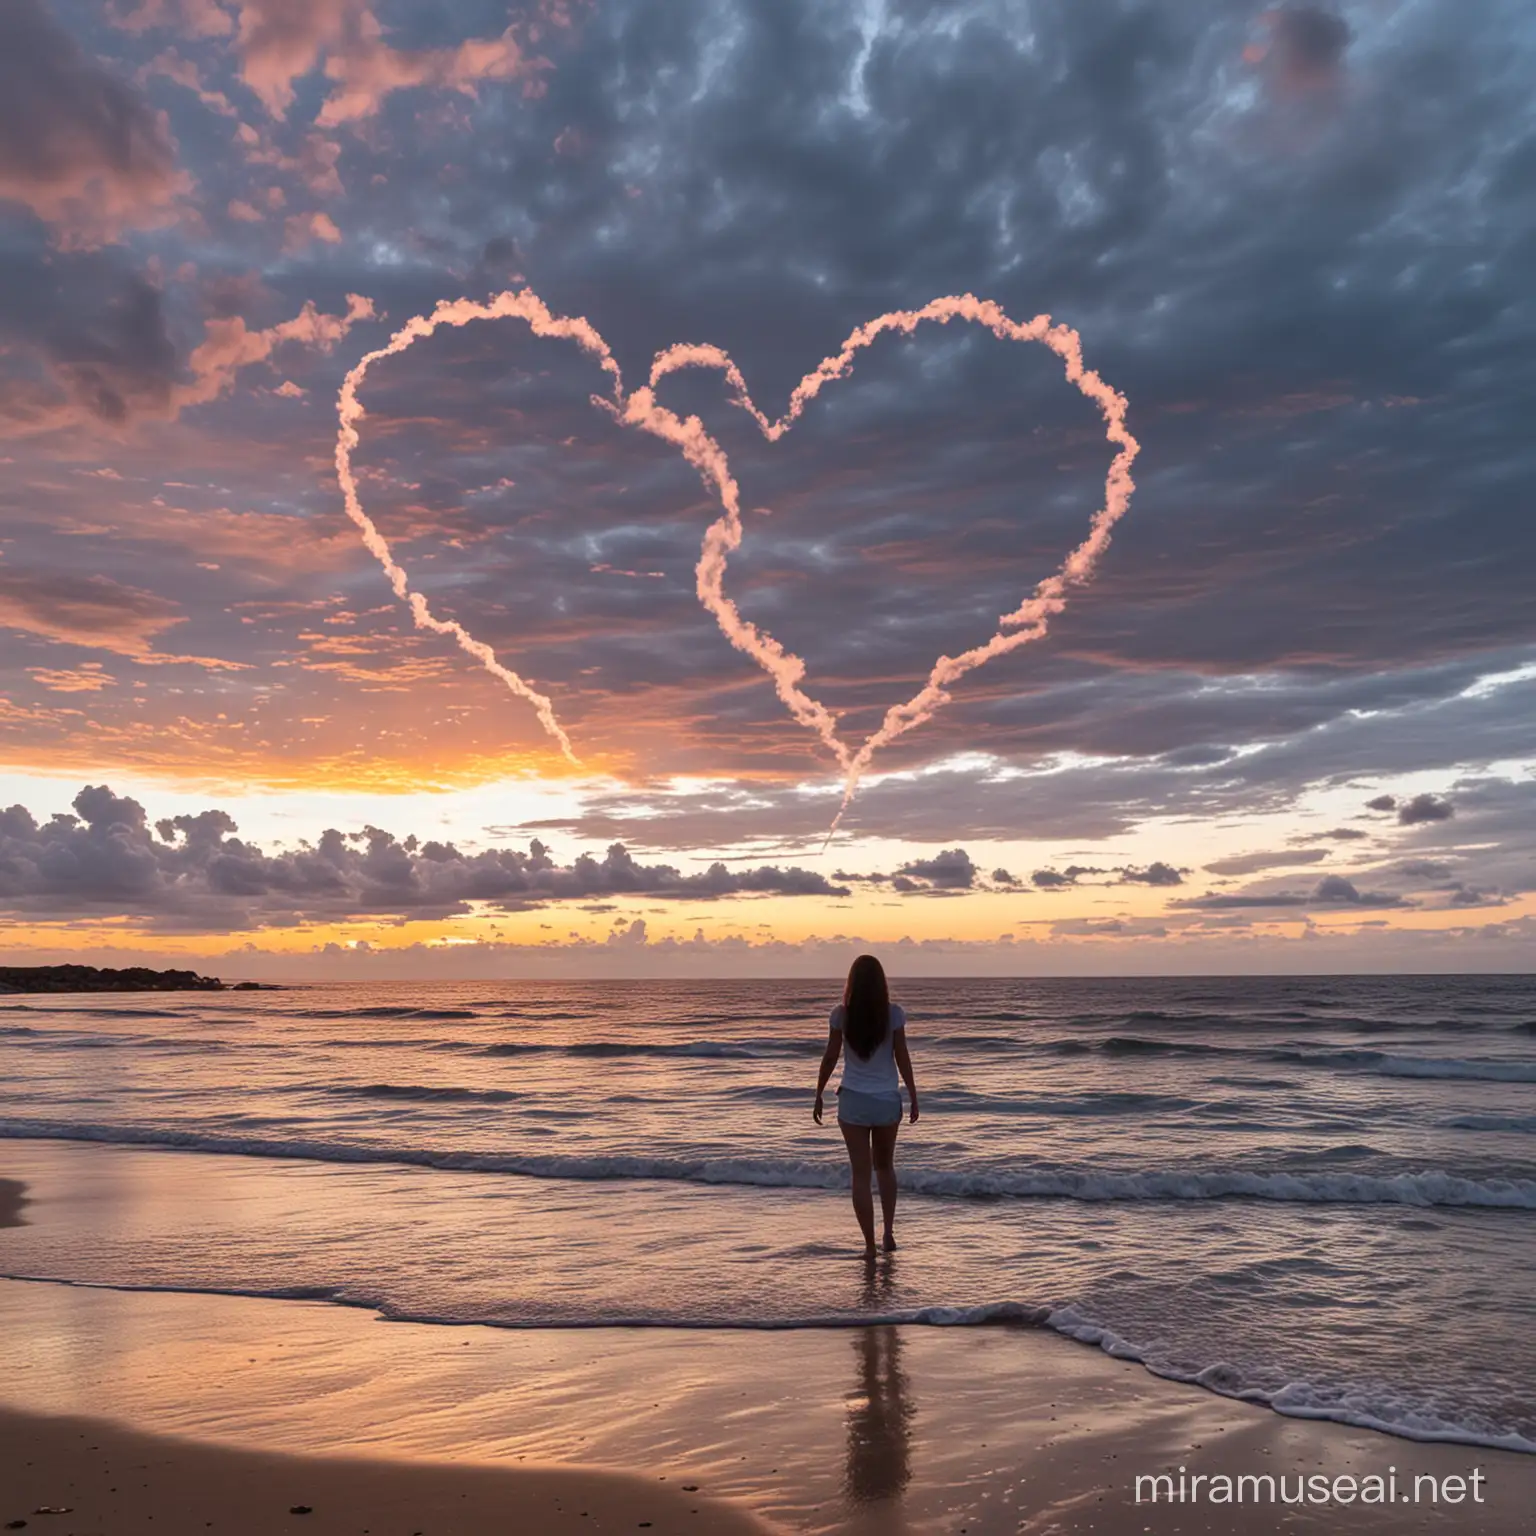 Solitary Girl Admiring HeartShaped Clouds at Sunset Beach